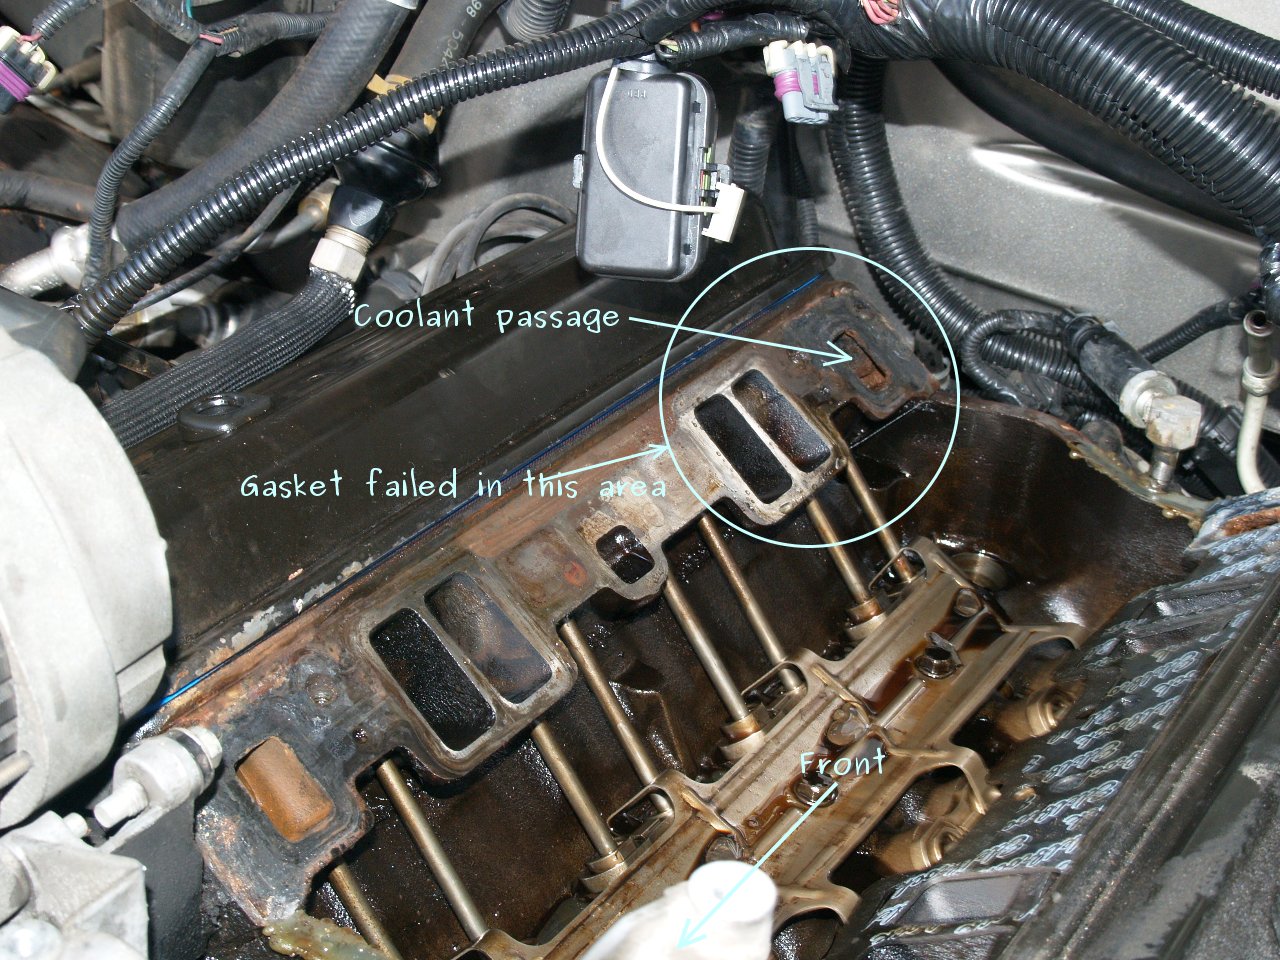 See B222E in engine